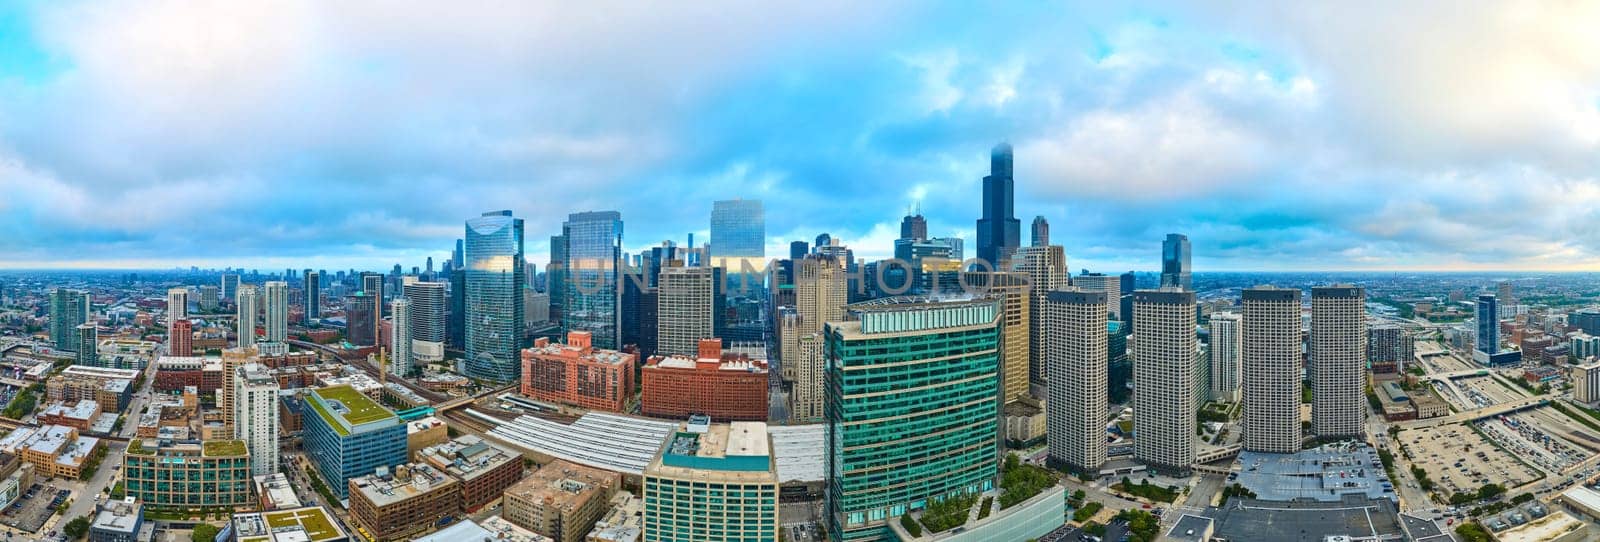 Aerial Chicago Skyline Panorama with Overcast Light by njproductions